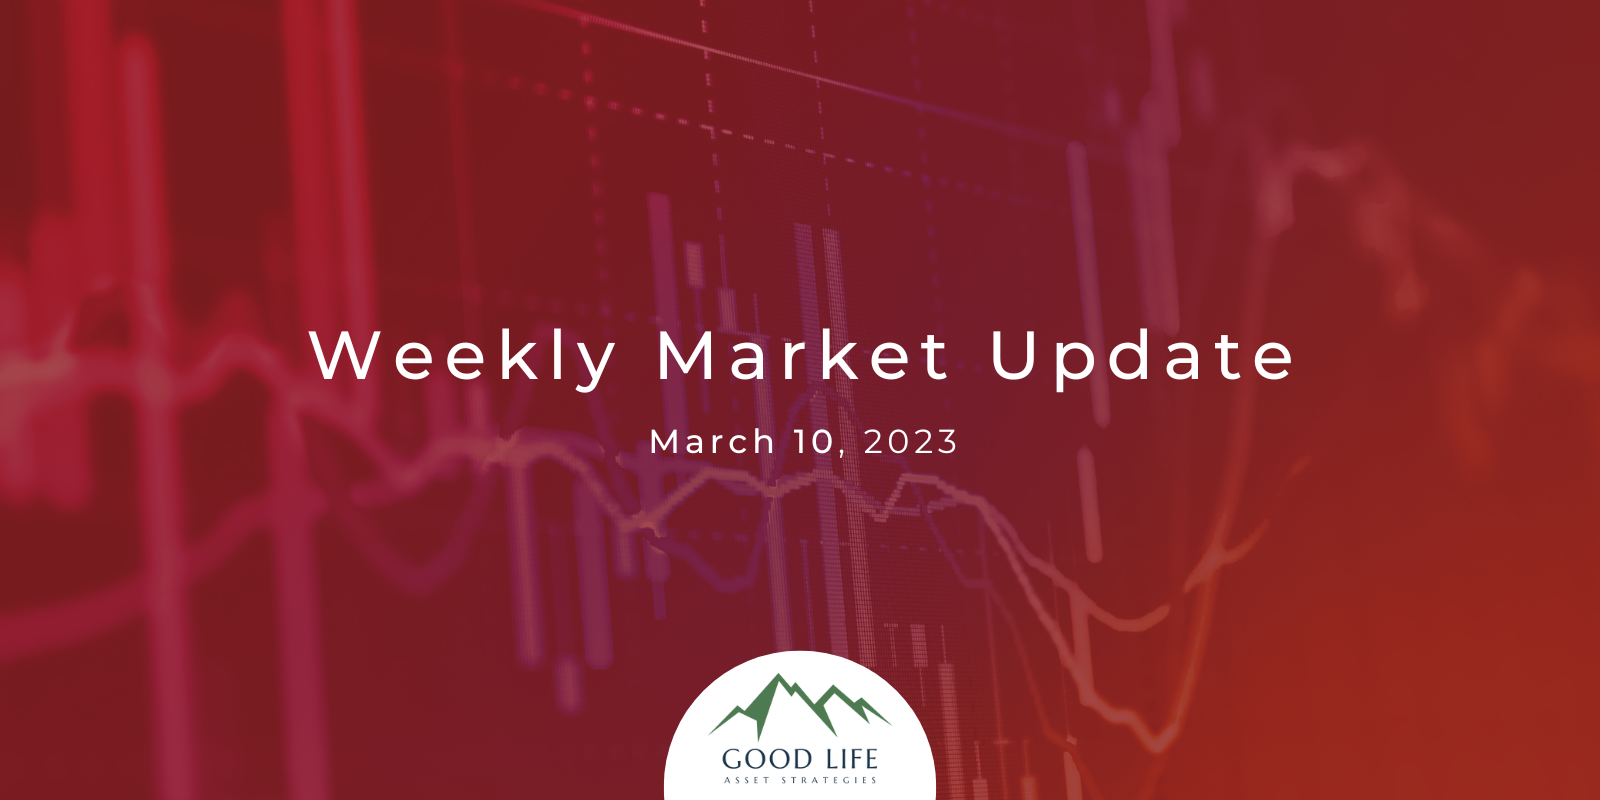 Learn more about where stocks are sitting within the trading range by reading DeWayne Hall’s Weekly Market Update for March 10, 2023.